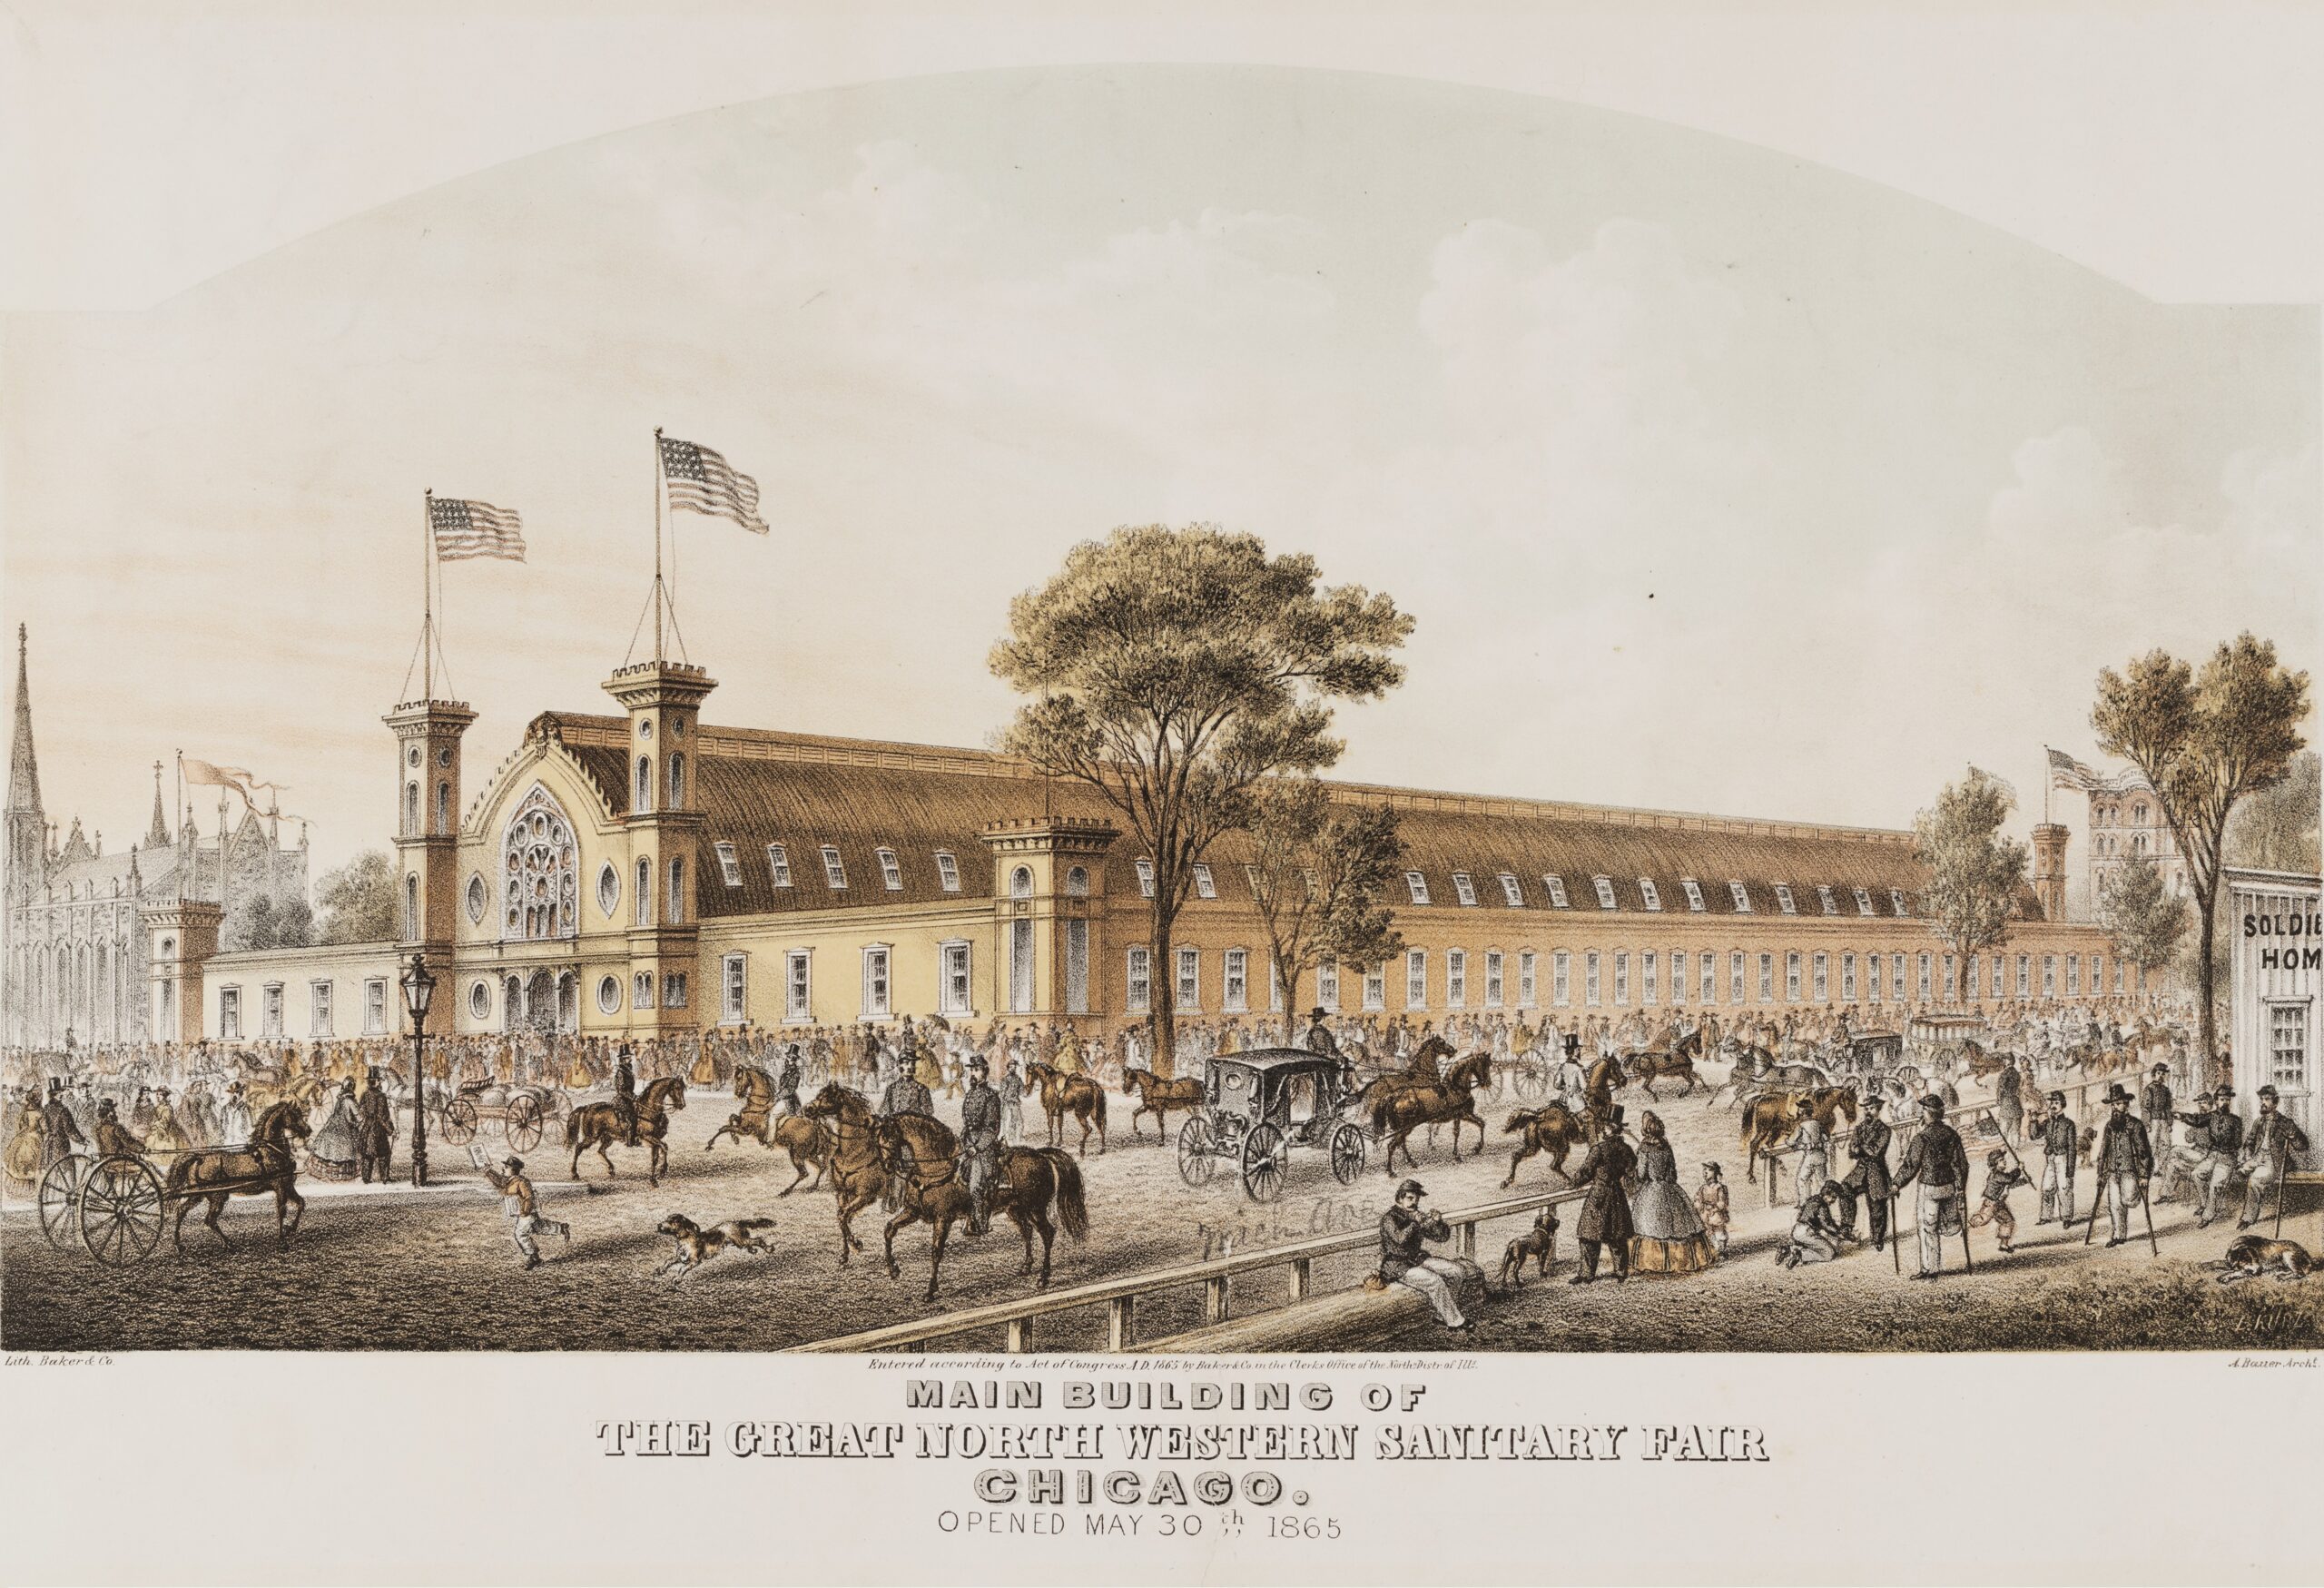 Lithograph of main building of Great Northwestern Sanitary Fair